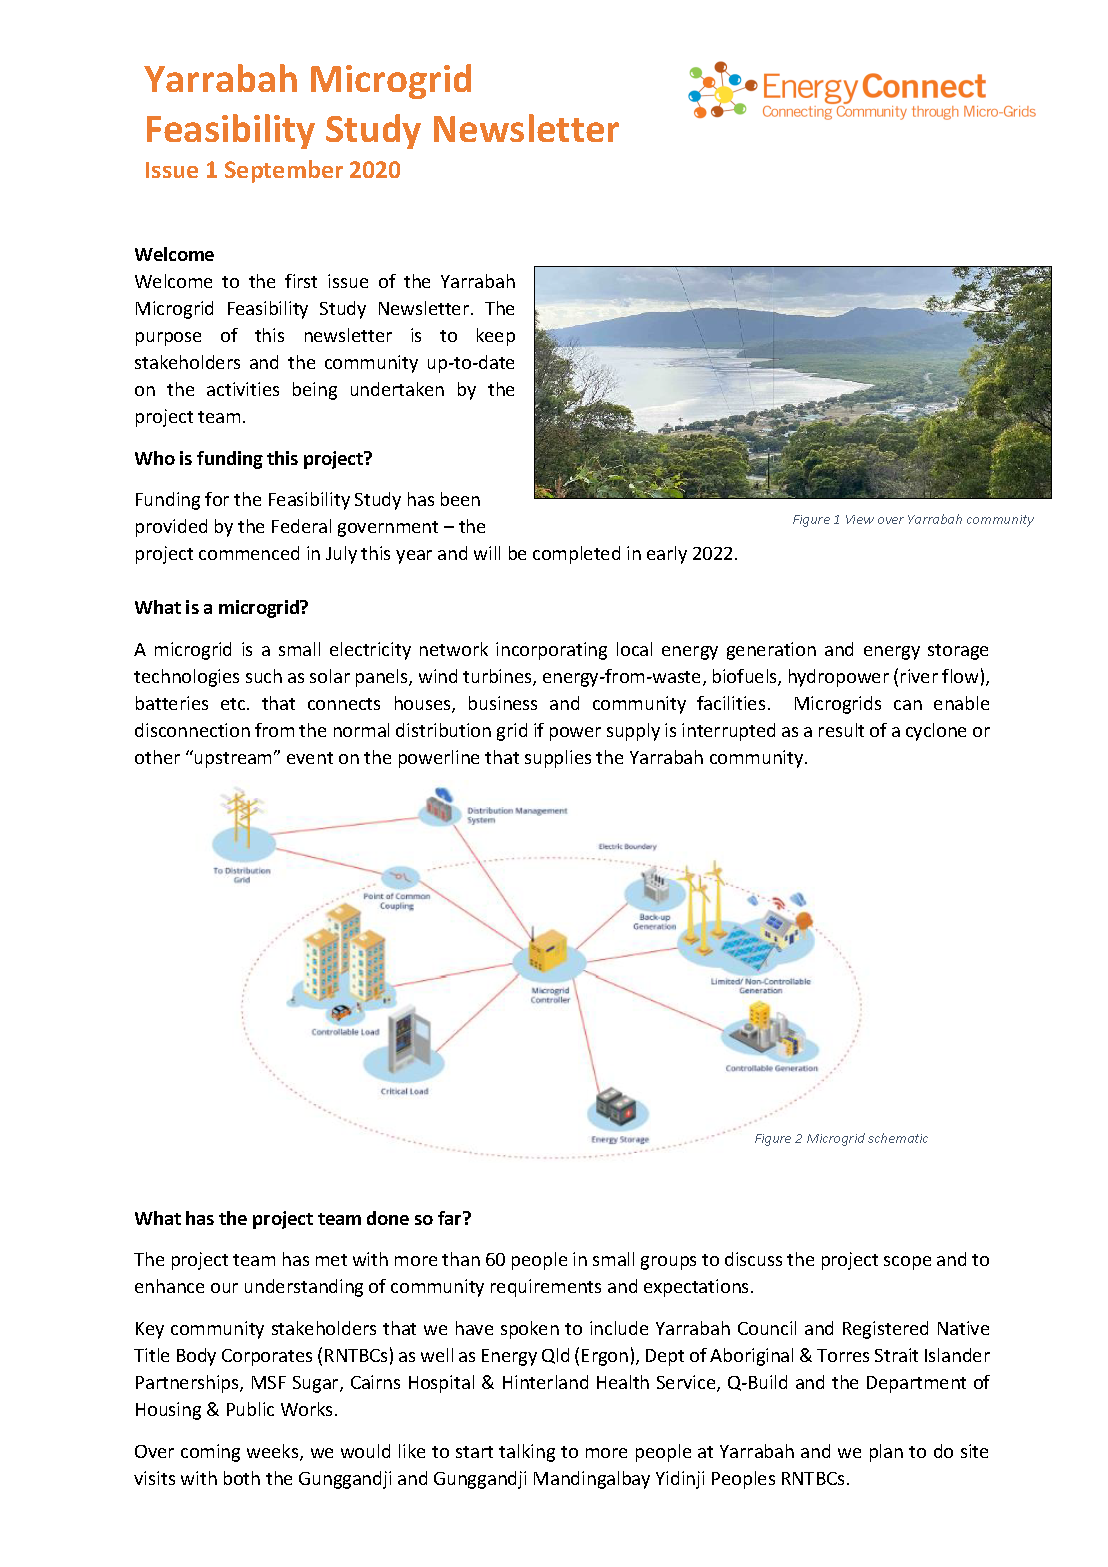 EnergyConnect - Yarrabah Microgrid Newsletter - Issue 1